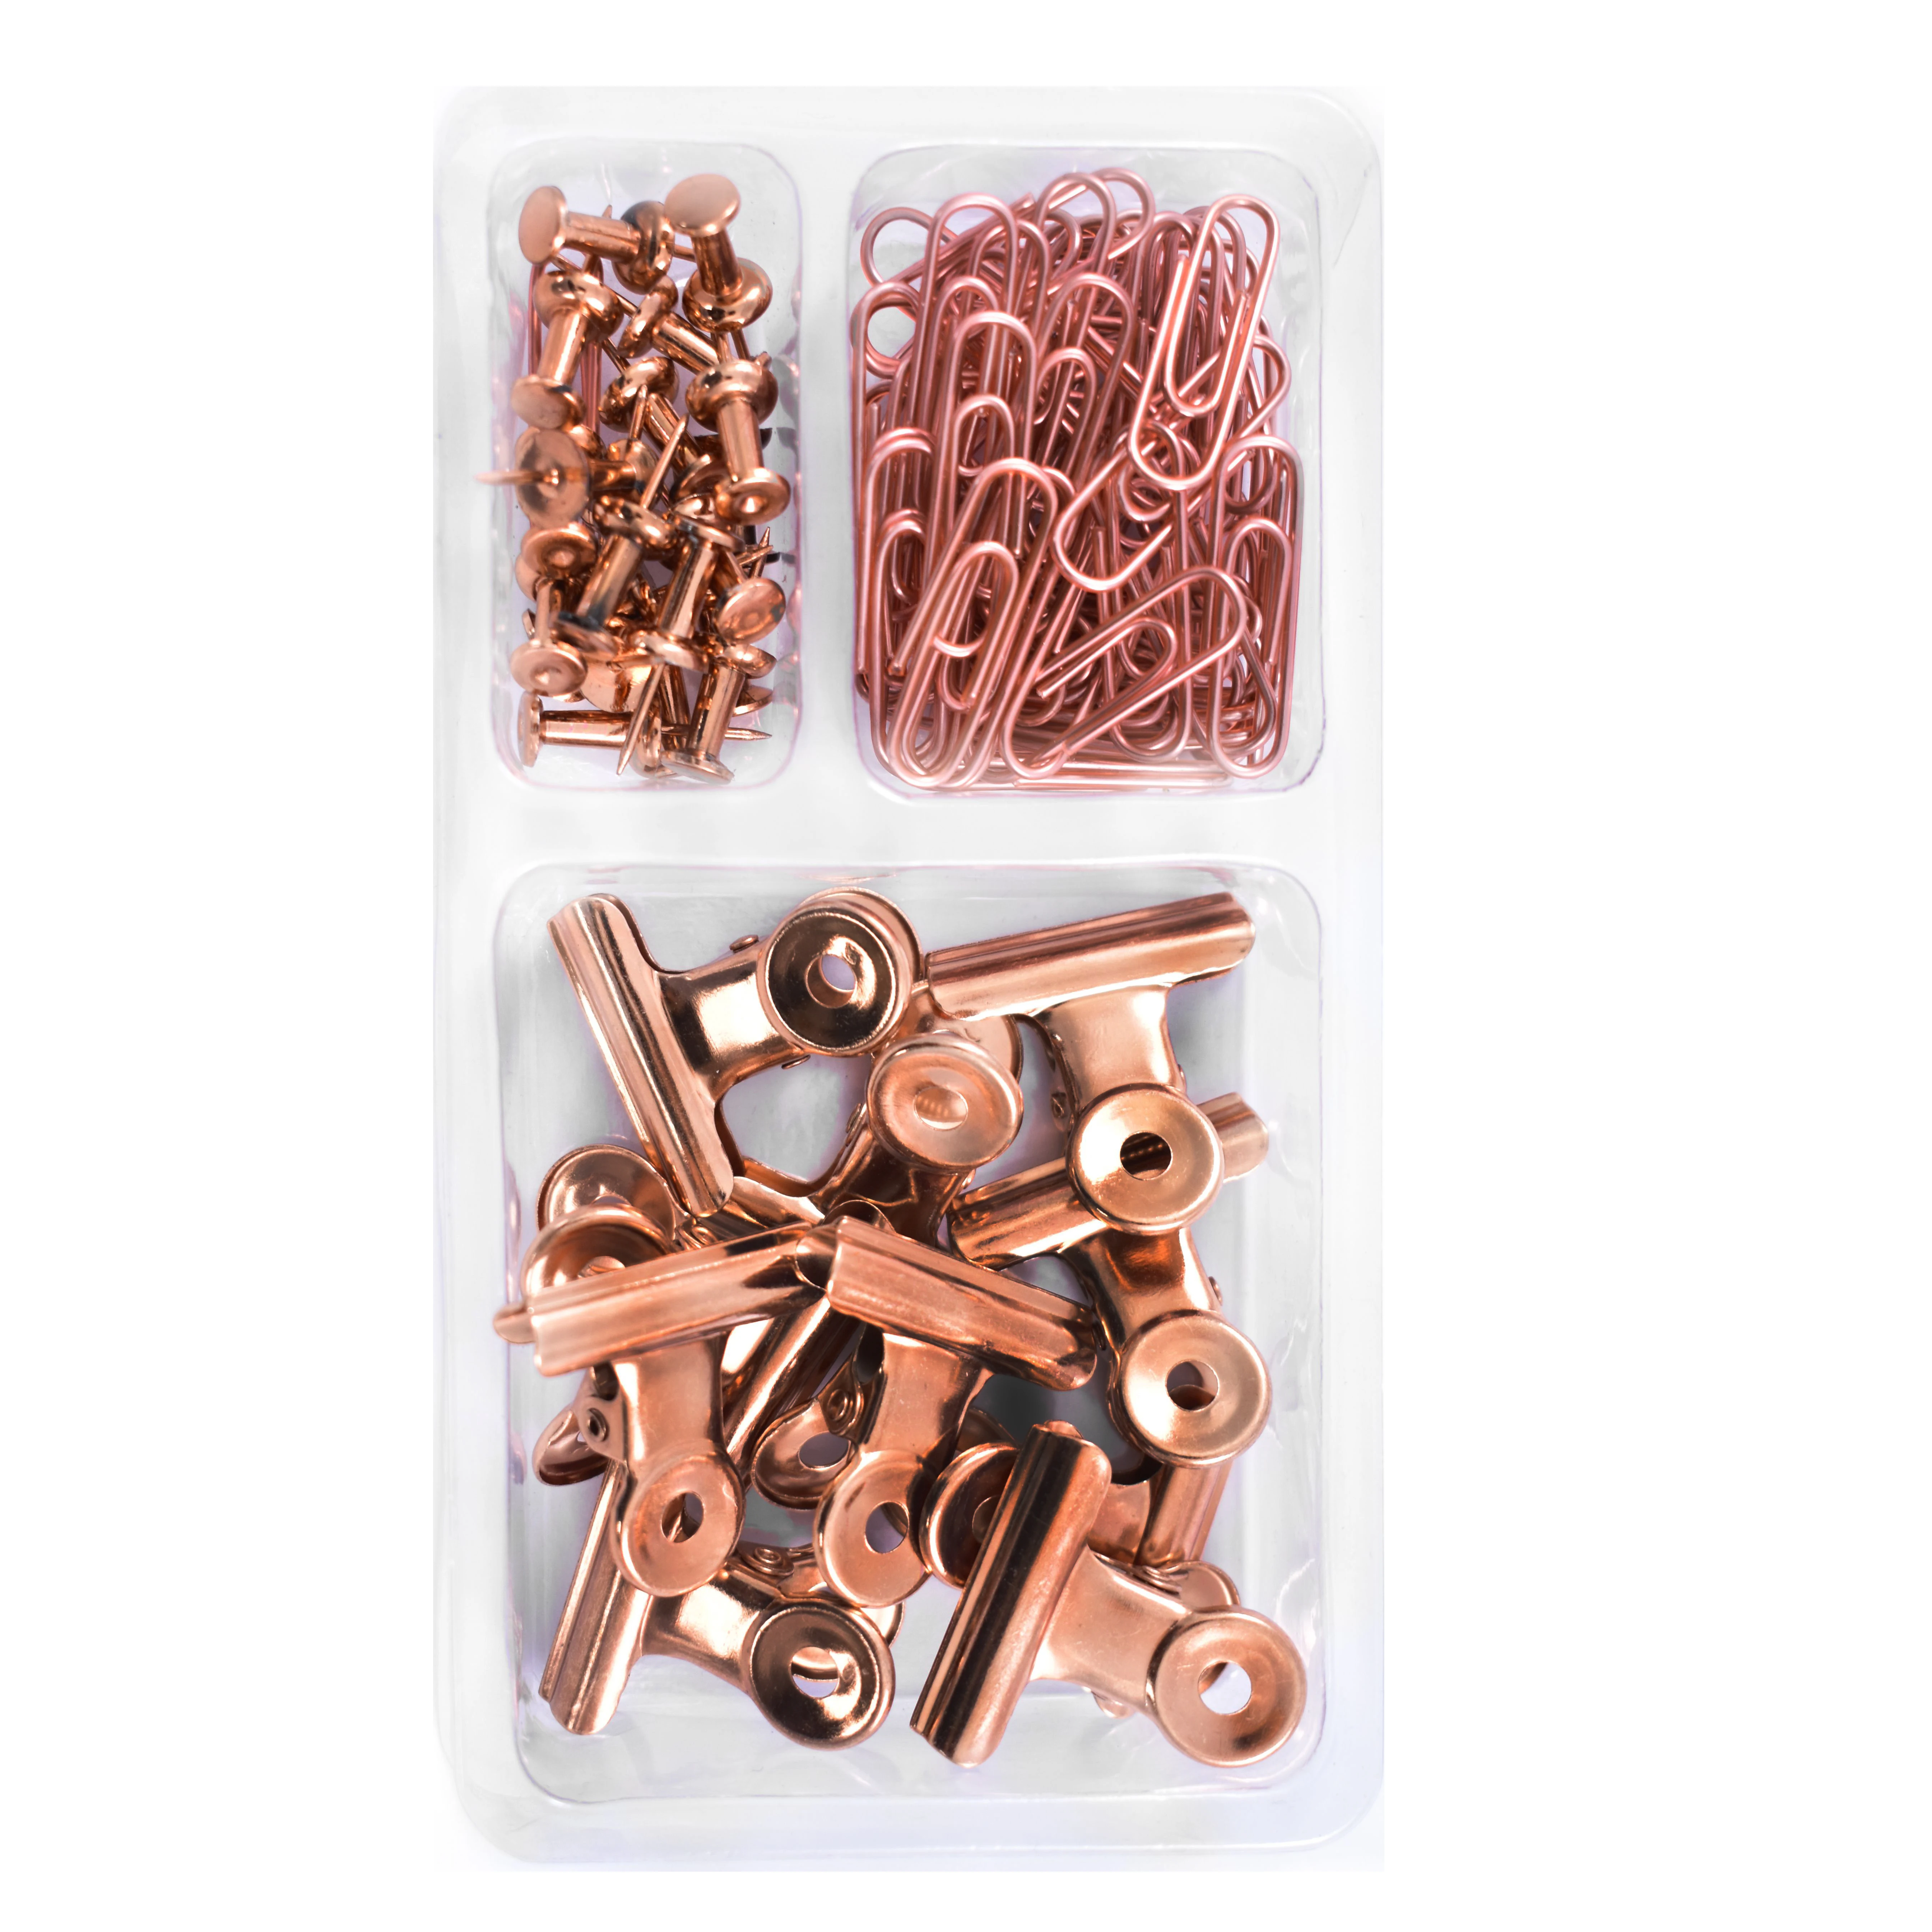 
Hot Selling Clips and Pins Rose Gold Color Assorted Clear Box and Storage Tray Vintage Nostalgia Series Stationery Set 